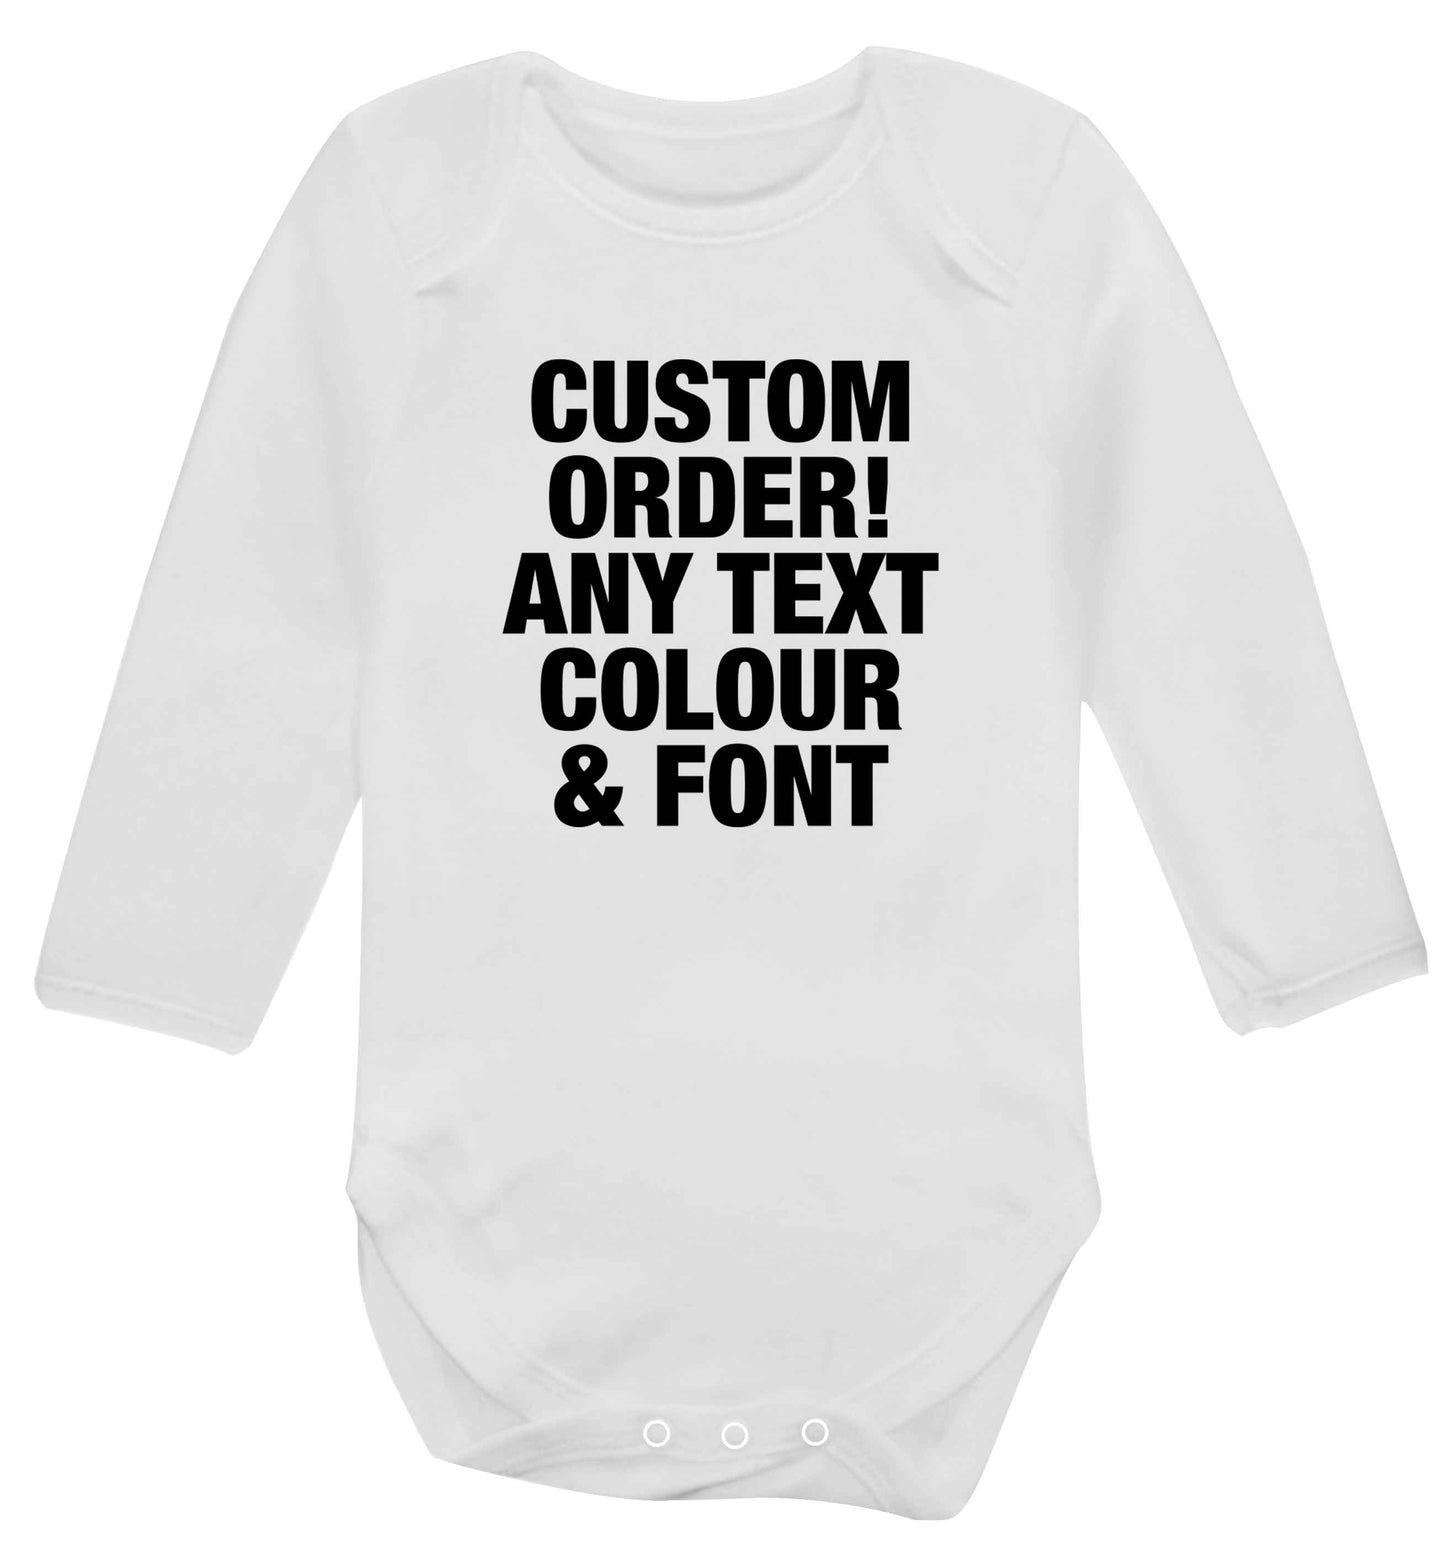 Custom order any text colour and font baby vest long sleeved white 6-12 months